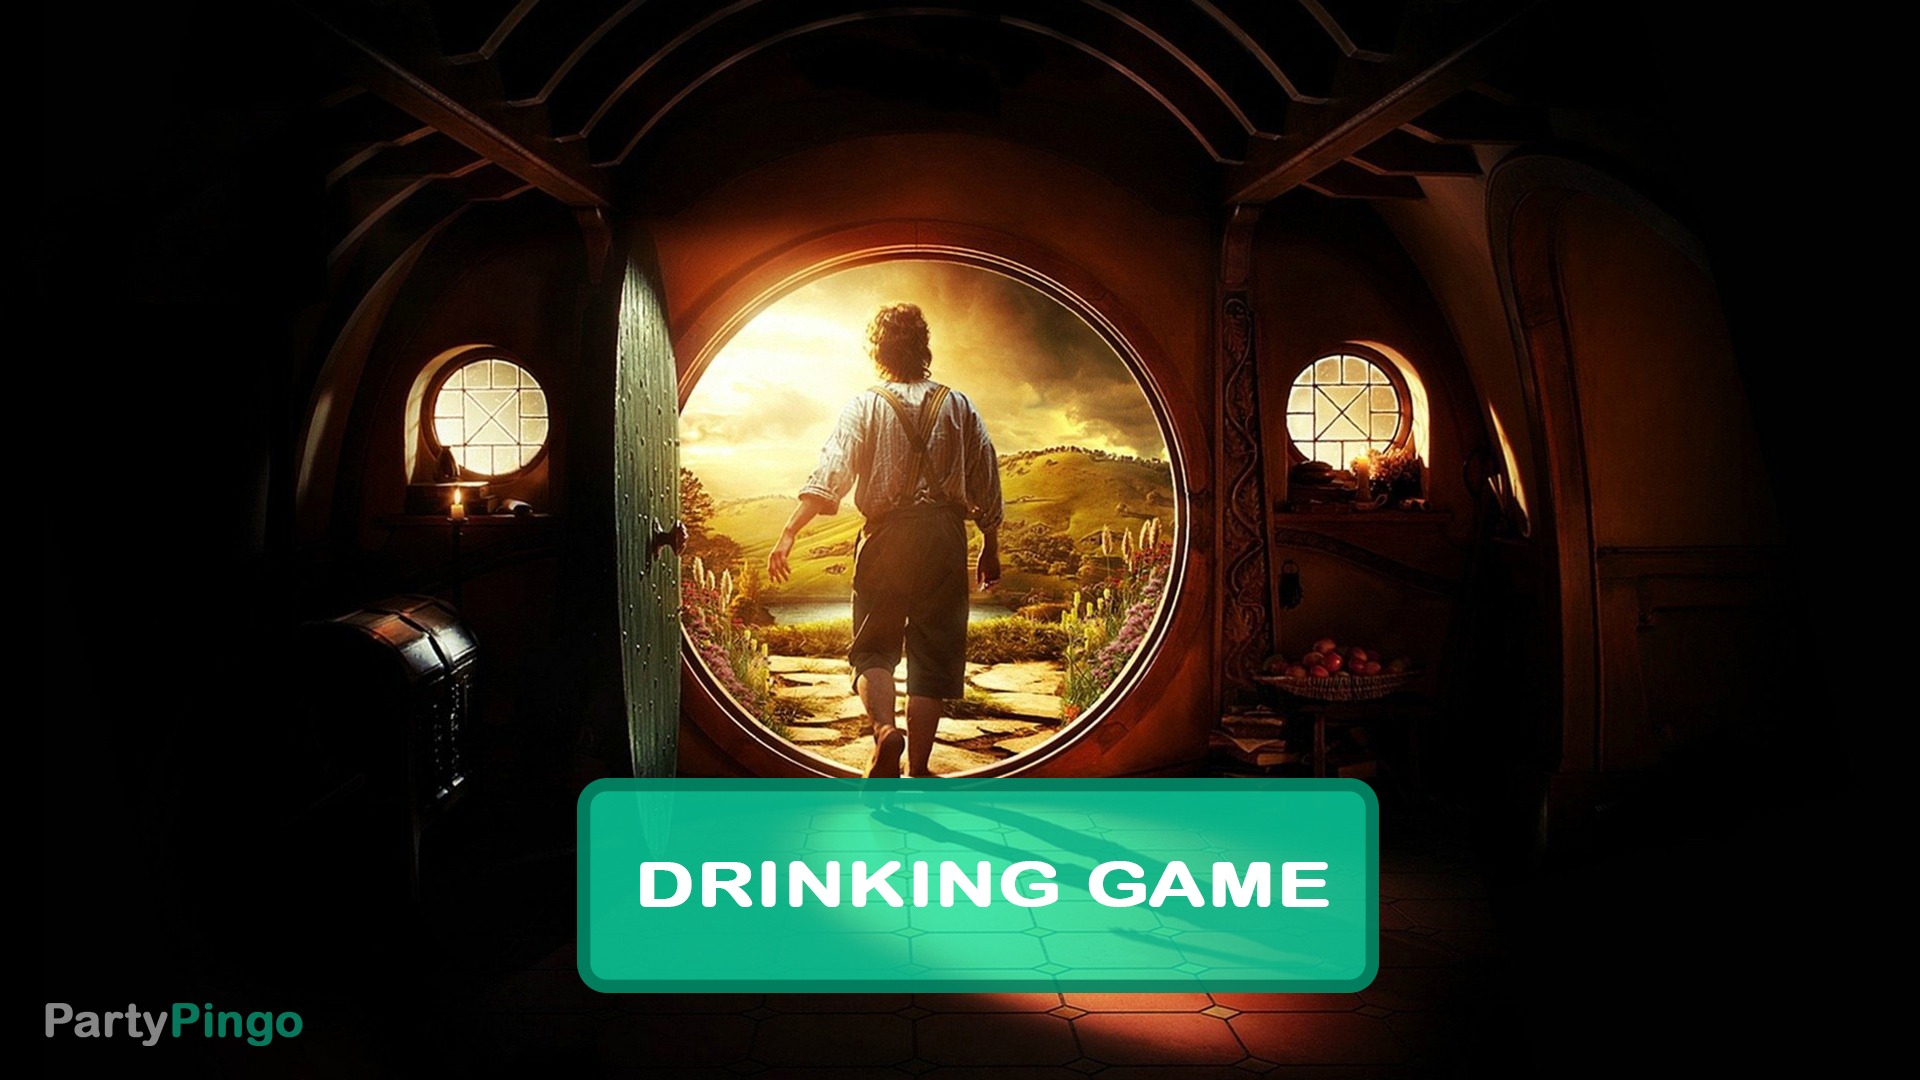 The Hobbit - An Unexpected Journey Drinking Game